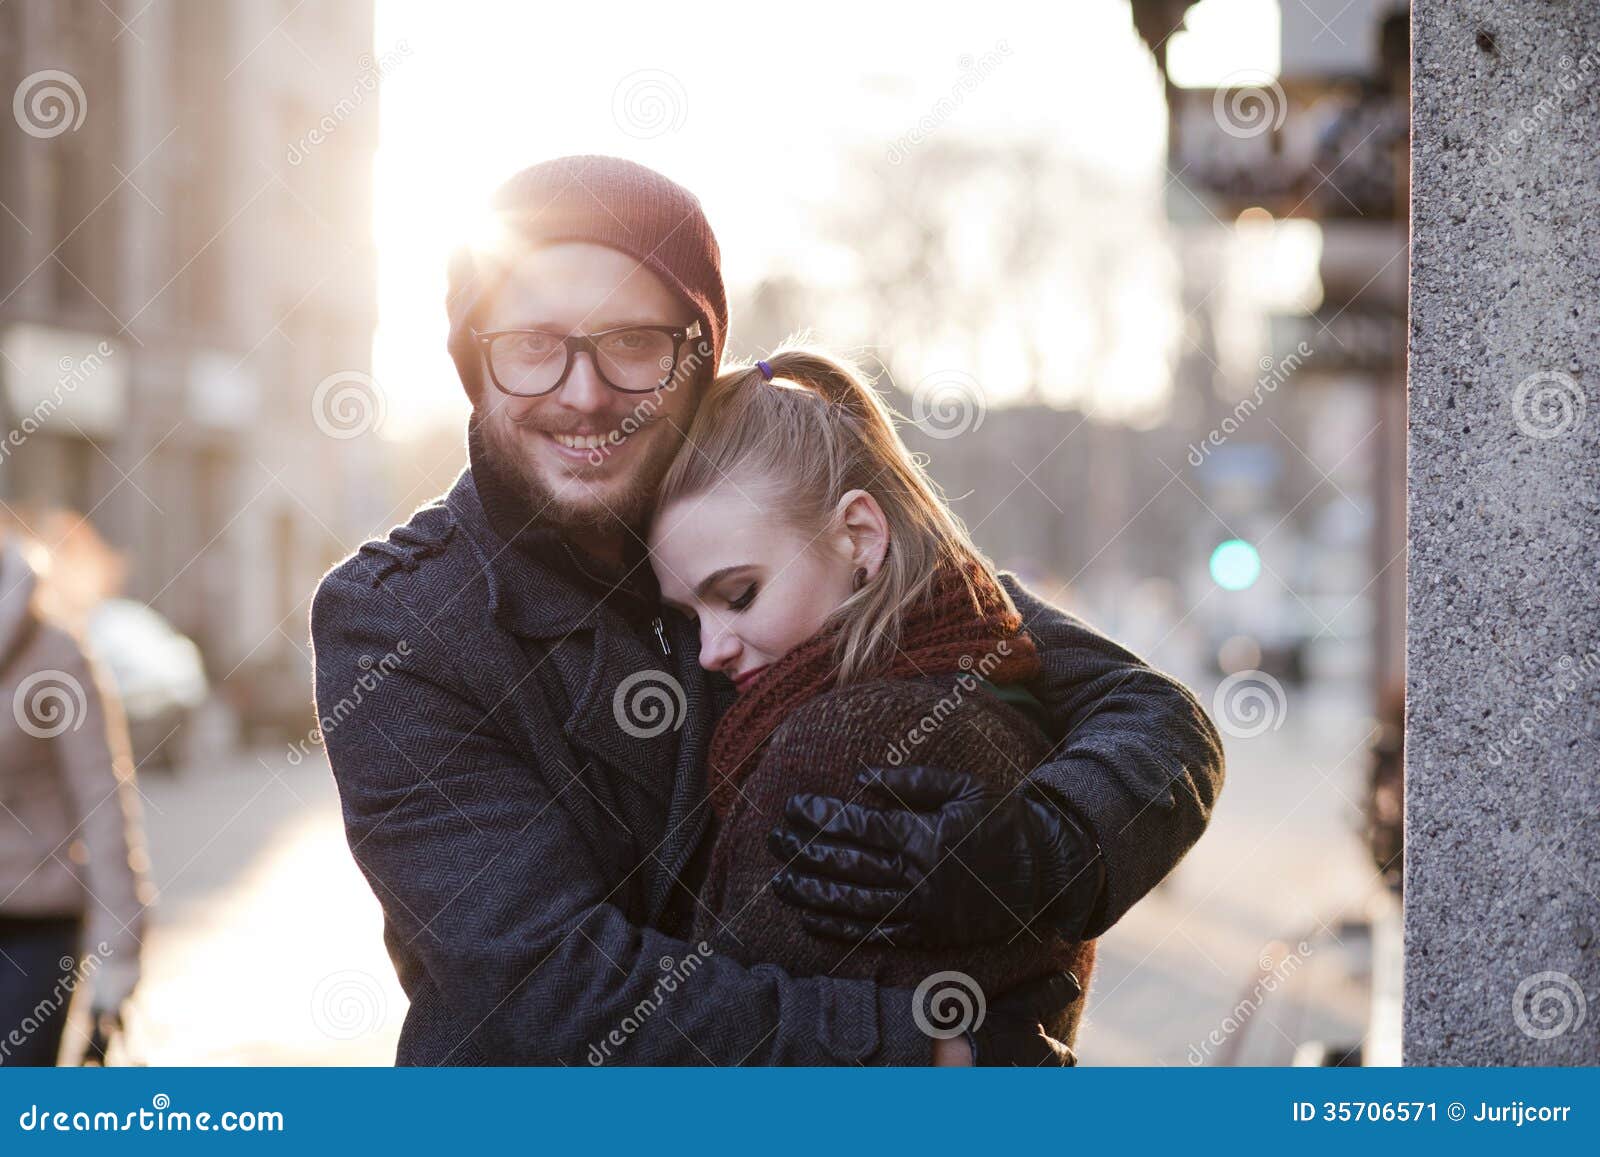 https://thumbs.dreamstime.com/z/young-happy-european-couple-smiling-hugging-winter-35706571.jpg